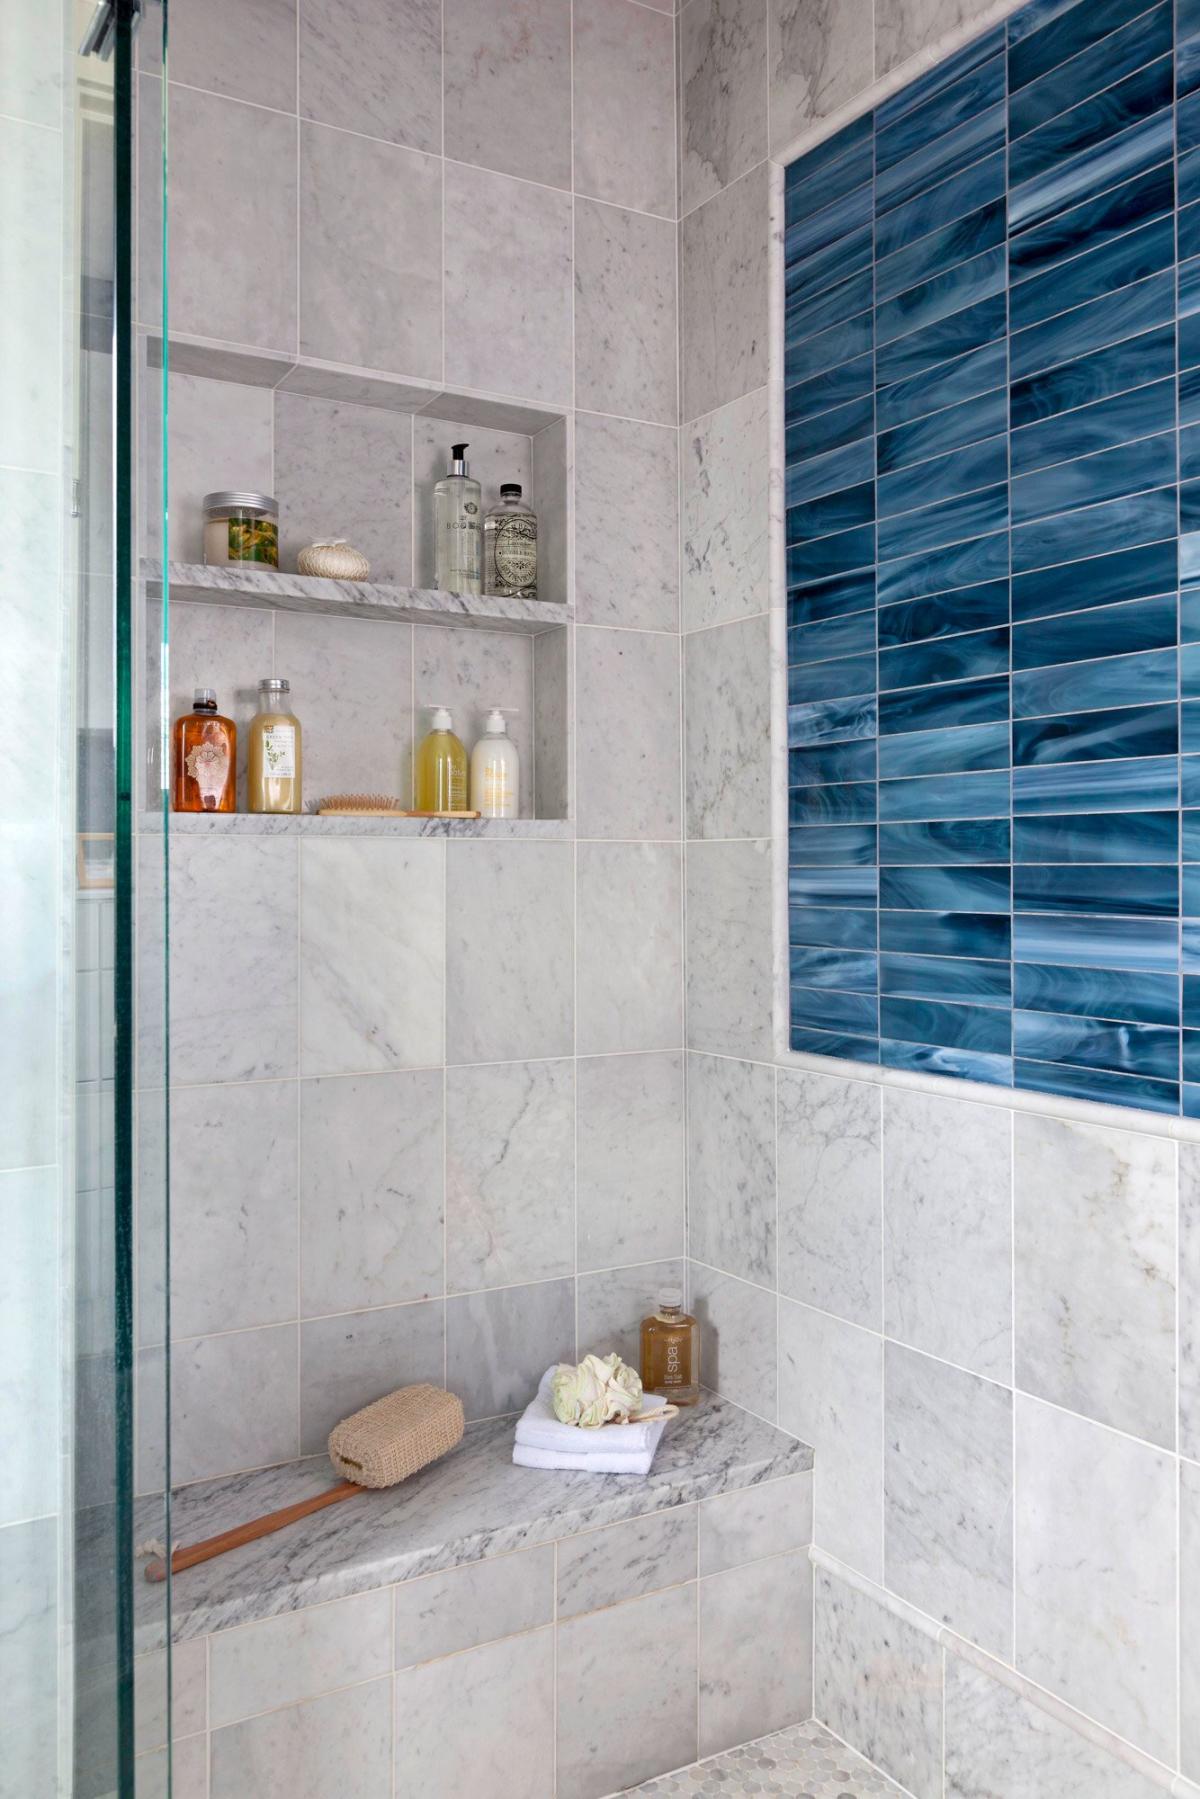 How To Tile Your Bathroom Shower Like a Pro